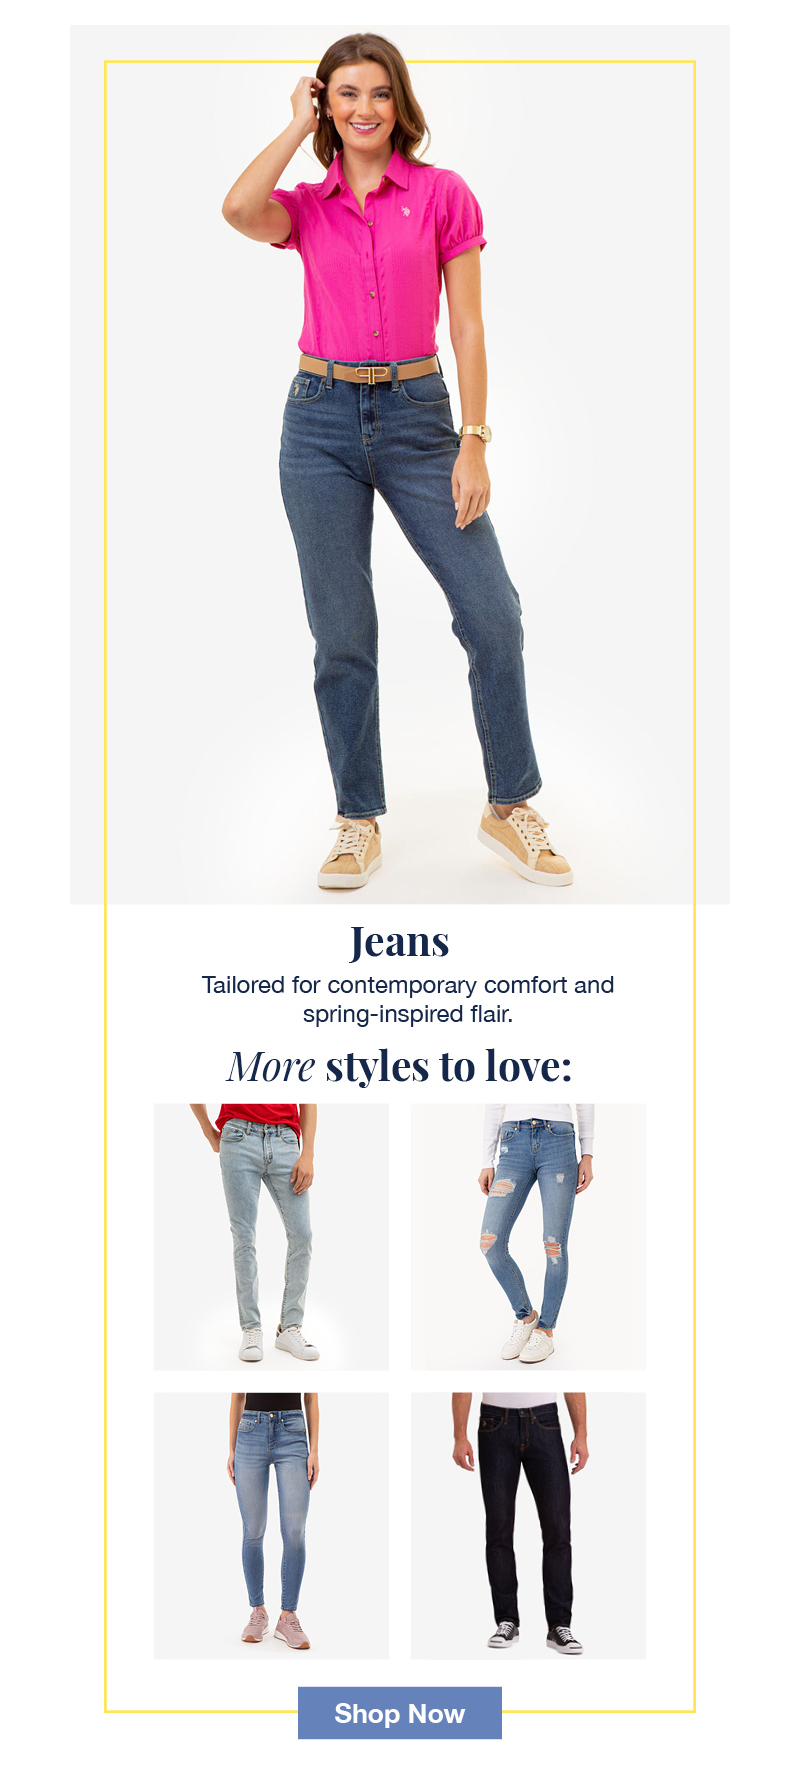 Jeans: Tailored for contemporary comfort and spring-inspired flair. More styles to love: Shop now